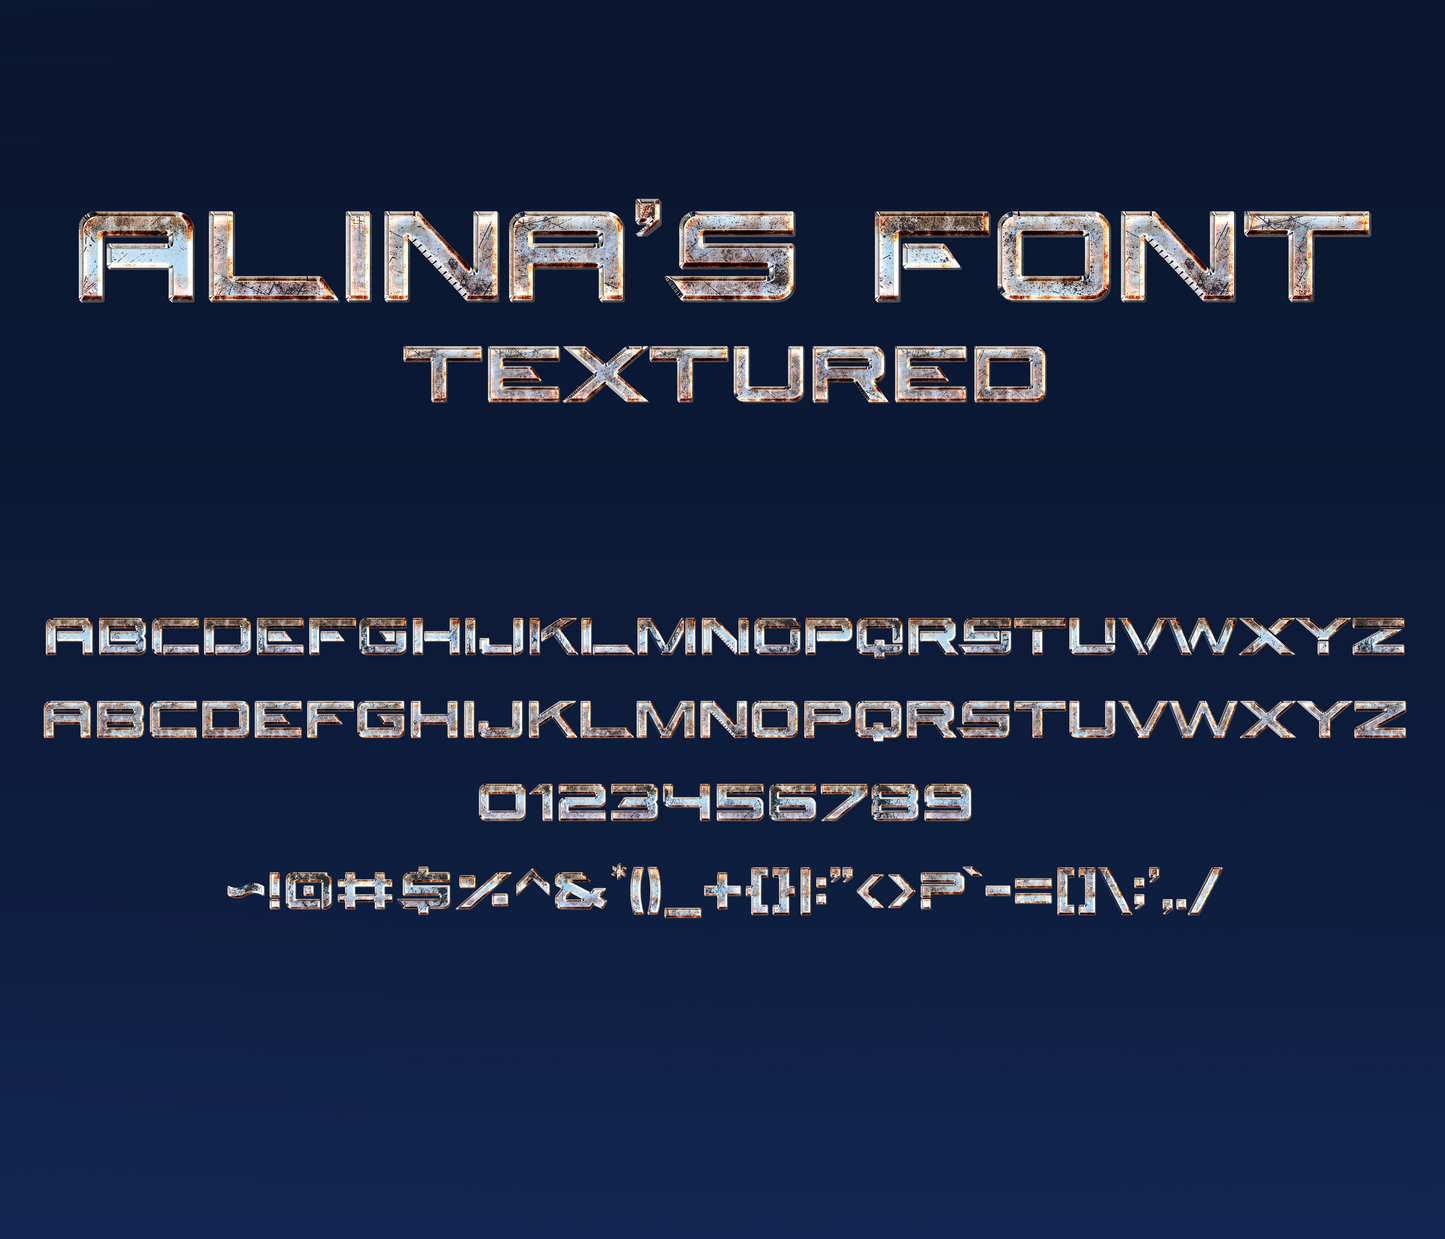 Real Steel 2 Movie Textured Font